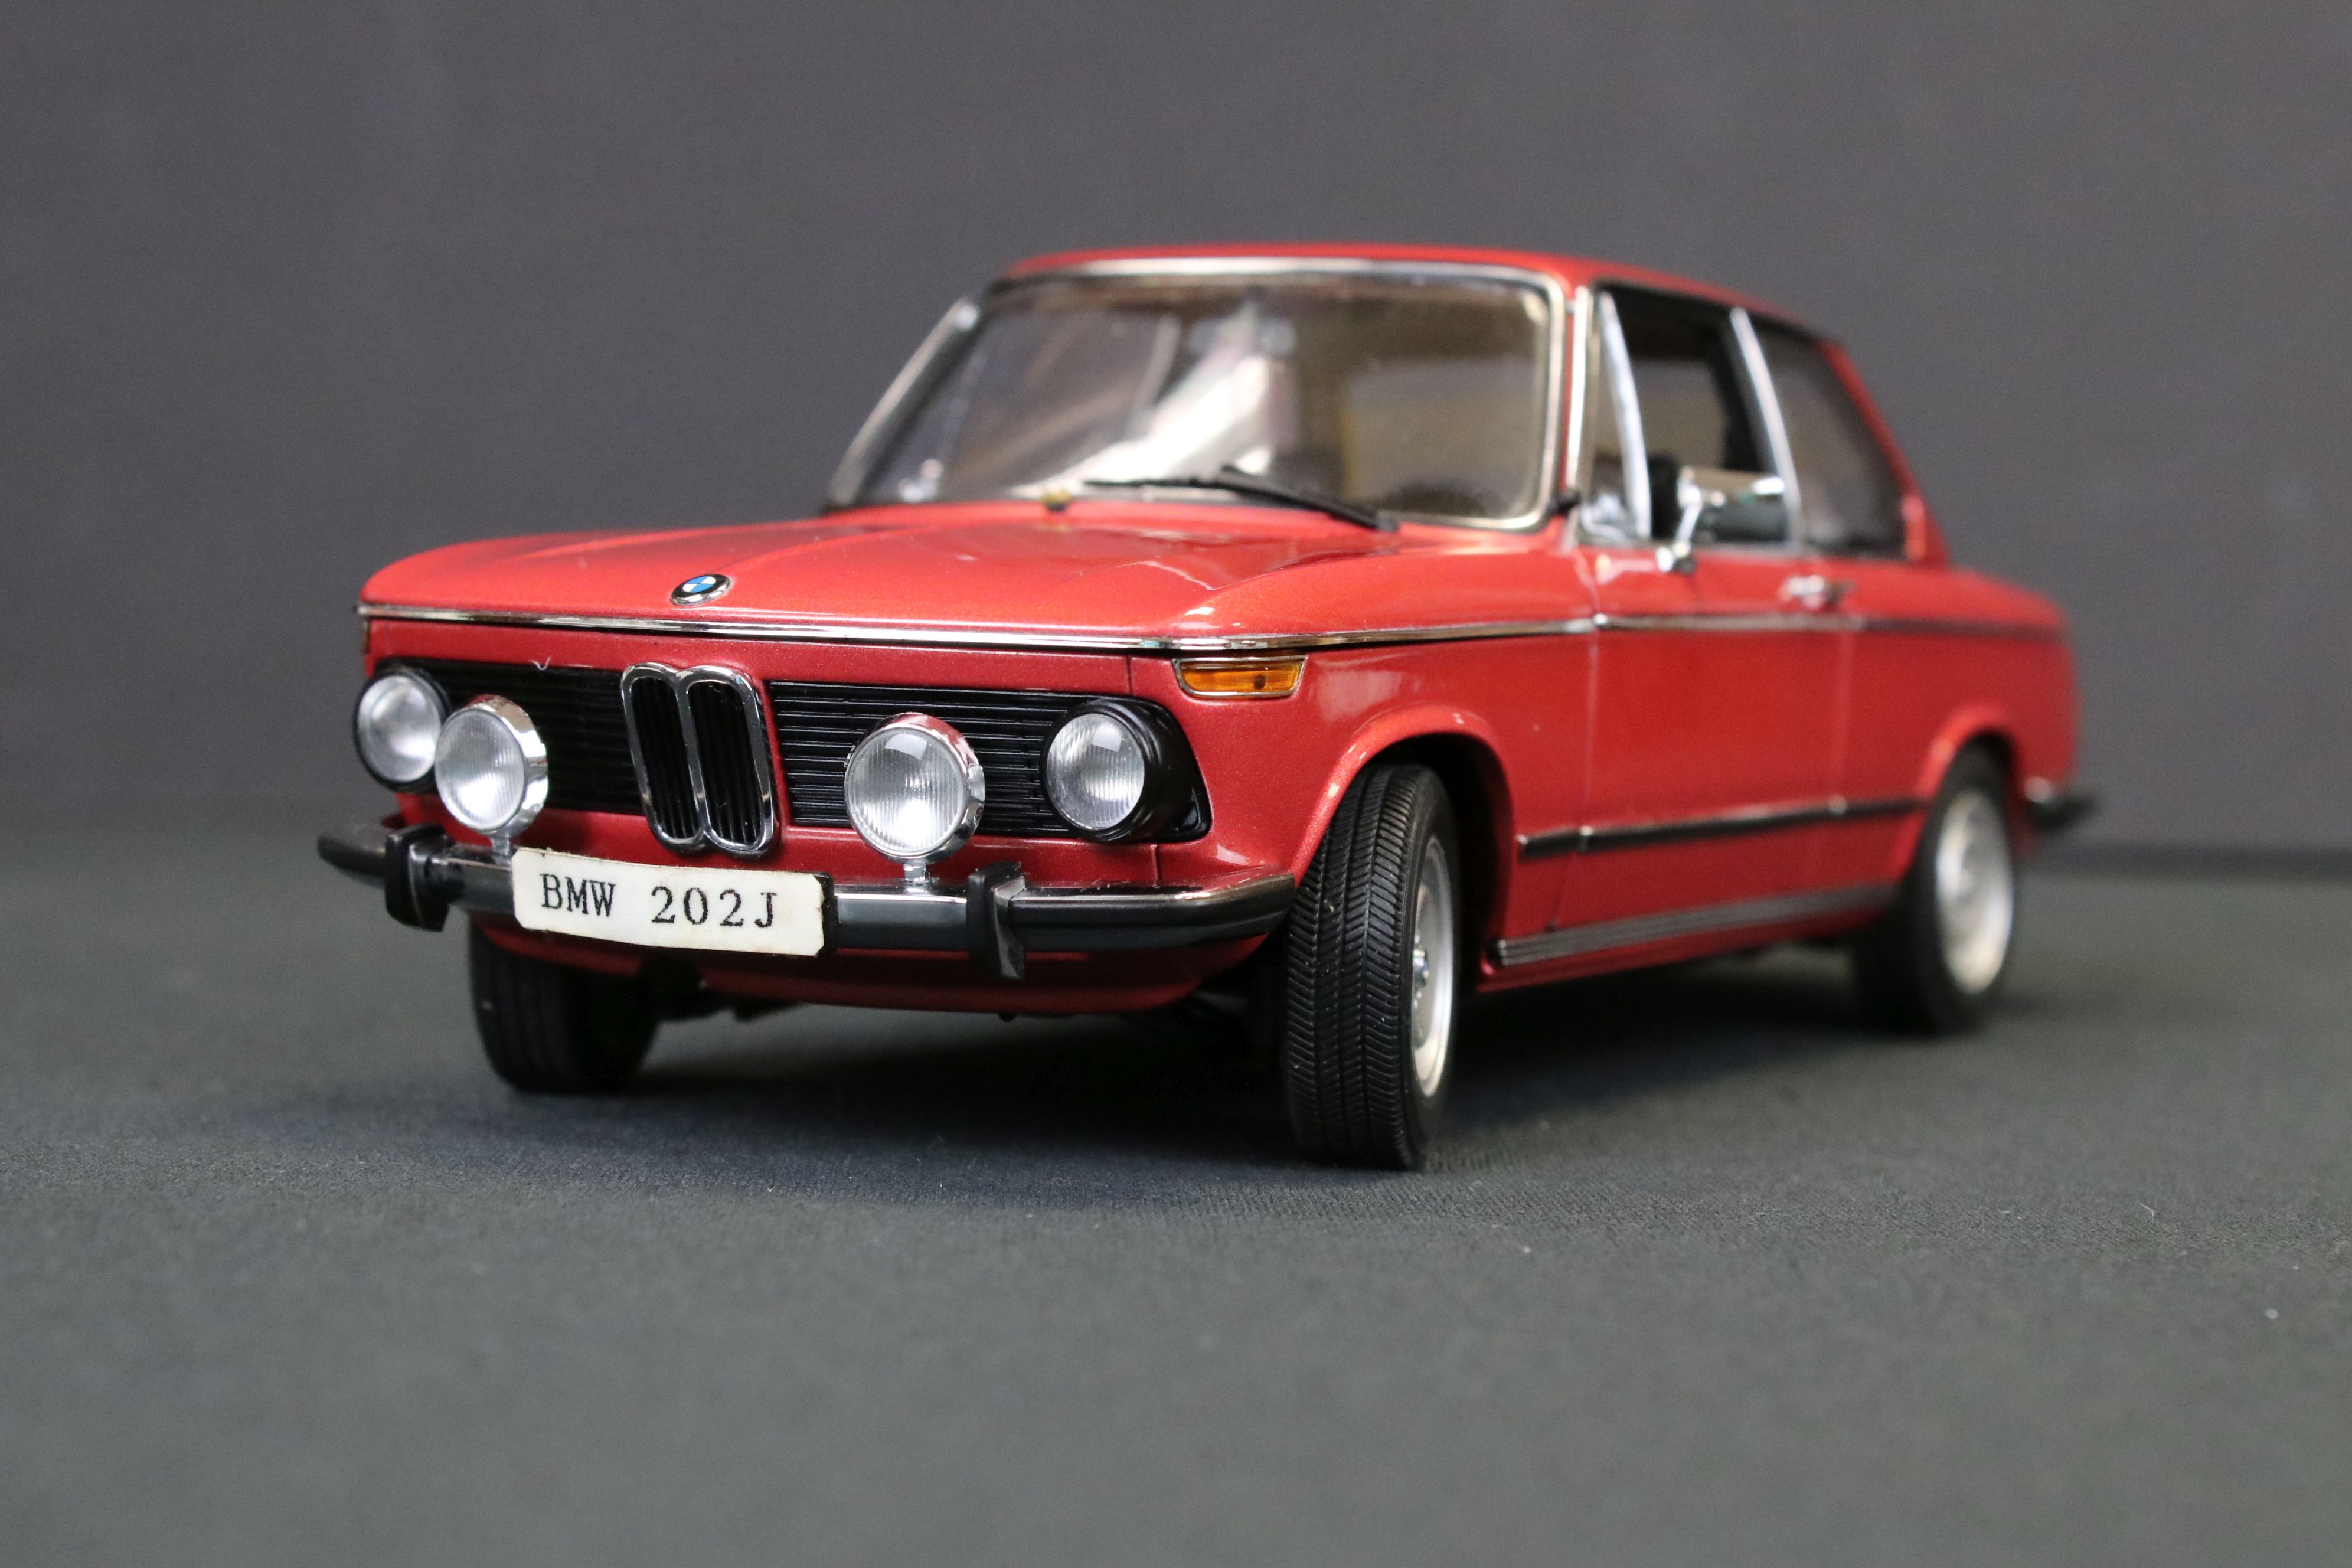 Two boxed AutoArt Millennium 1/18 diecast models to include BMW 2002 L and Lancia Fulvia 1.6HF - Image 4 of 14